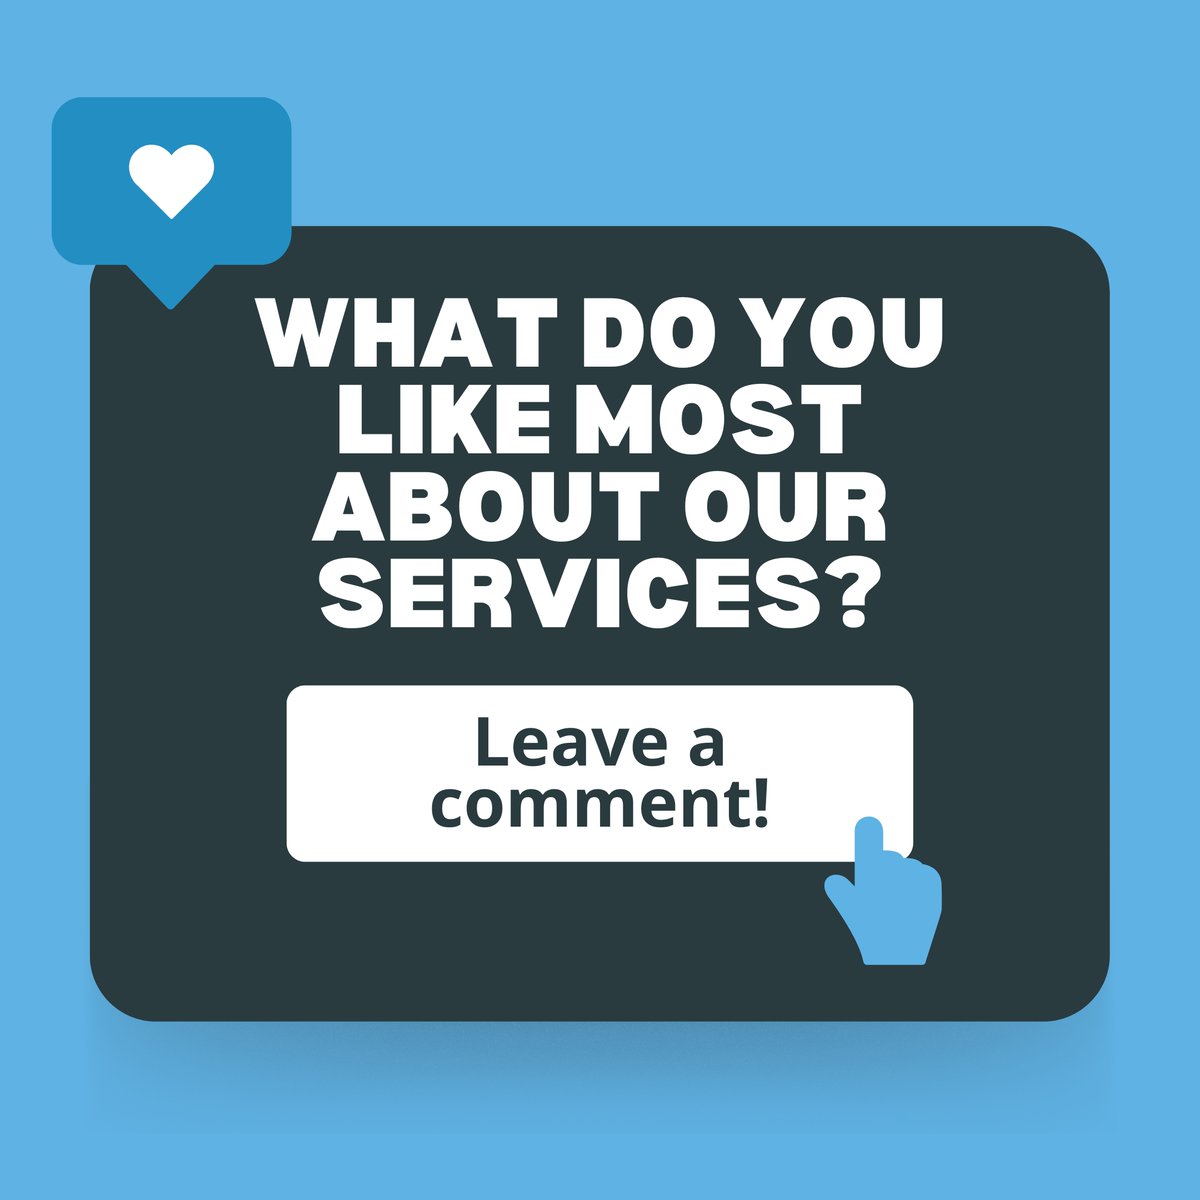 Please leave a comment letting us know what your favorite thing about us is! 😃 We love seeing your happy faces and want to know what you love about us, too! #FavoriteThing #comment #LetUsKnow